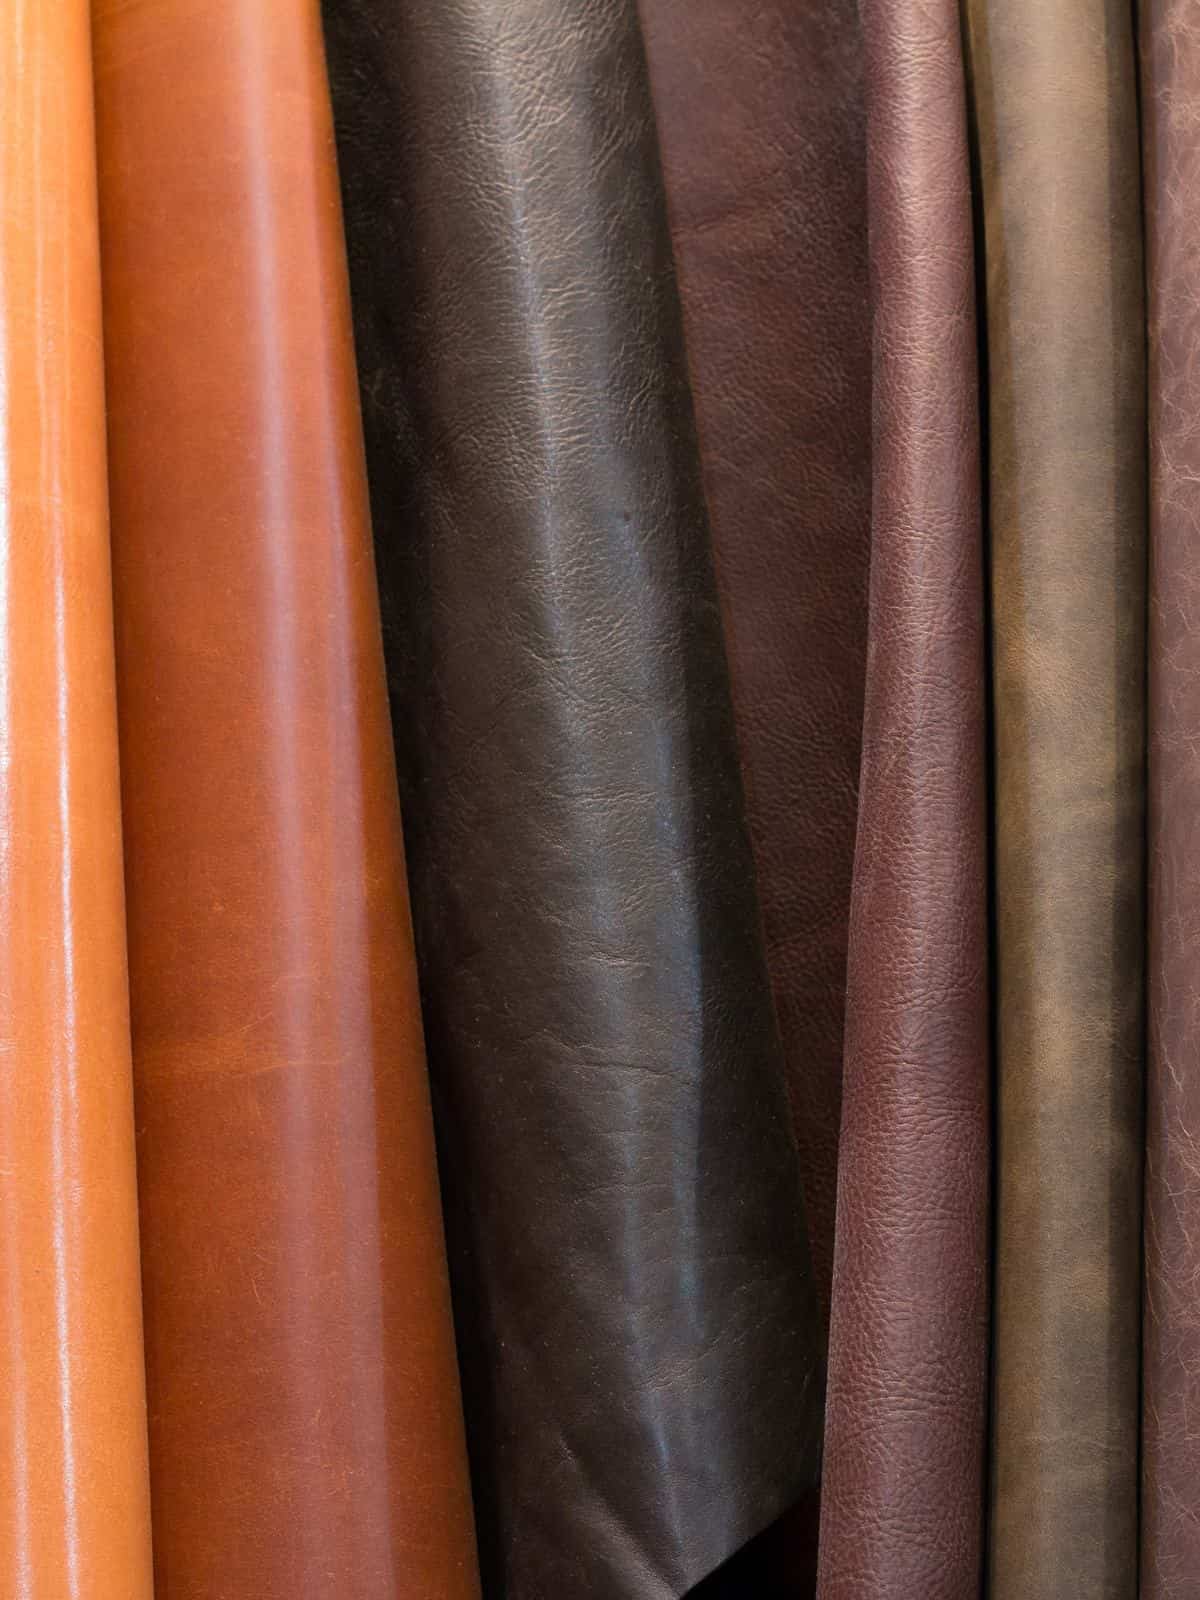 Polyurethane leather pieces in several shades of dark and light brown colors. 